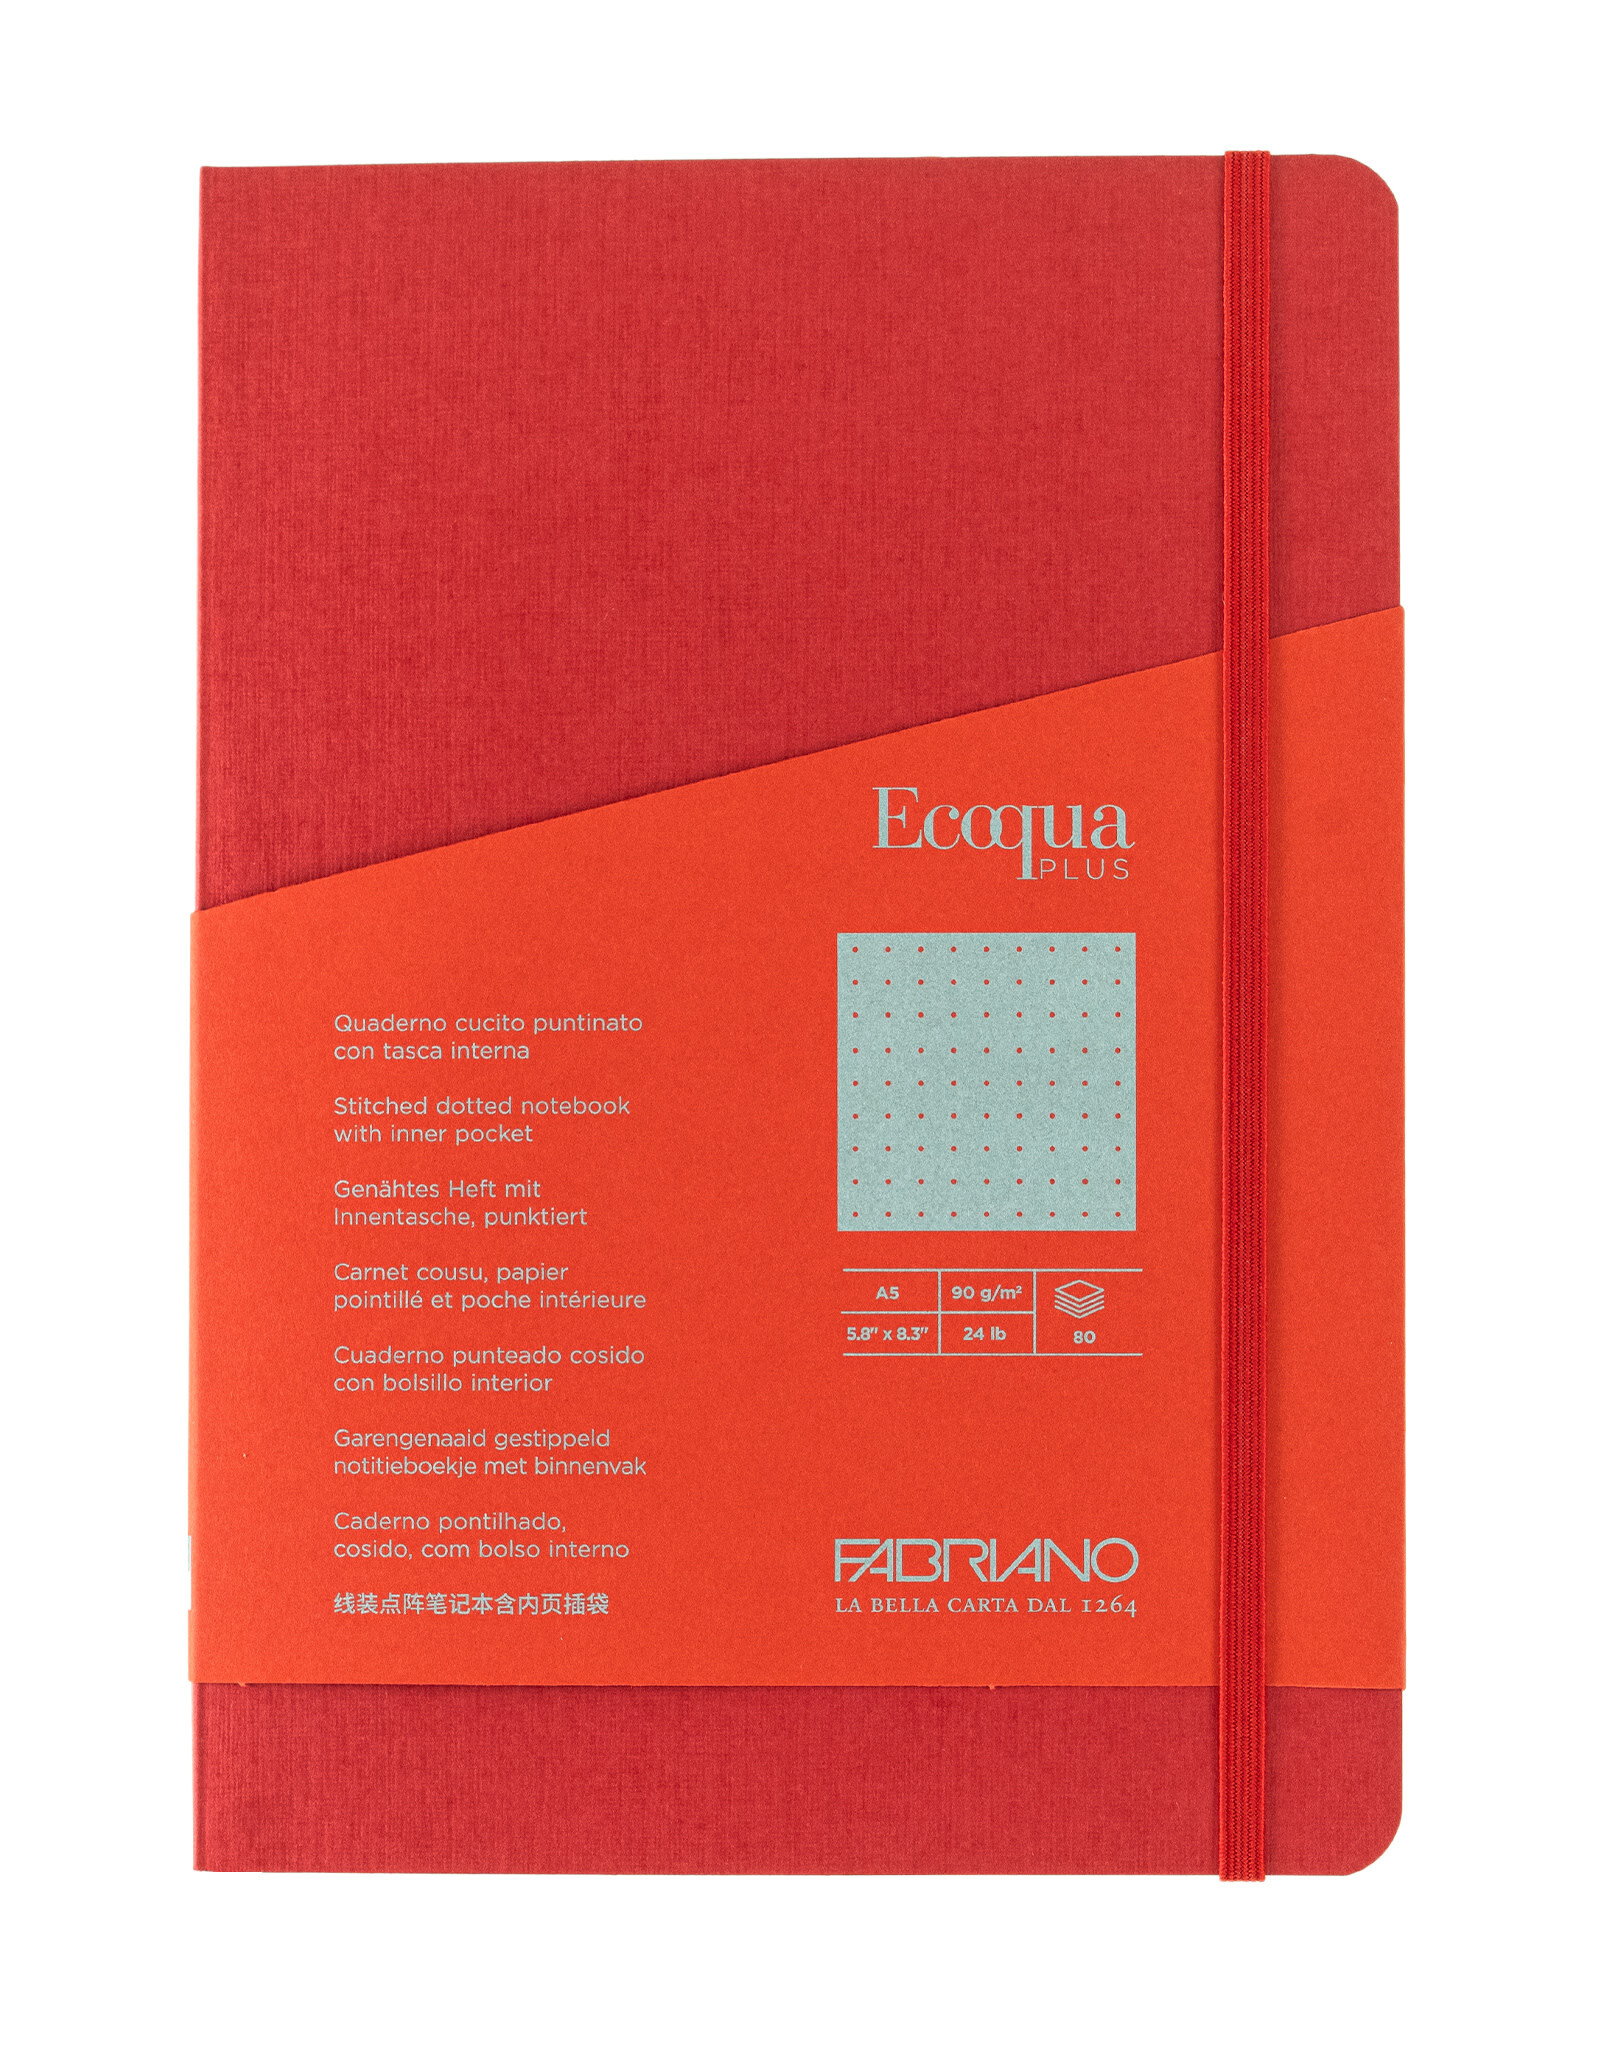 Ecoqua Plus Sewn Spine Notebook, Red, A5, Dotted